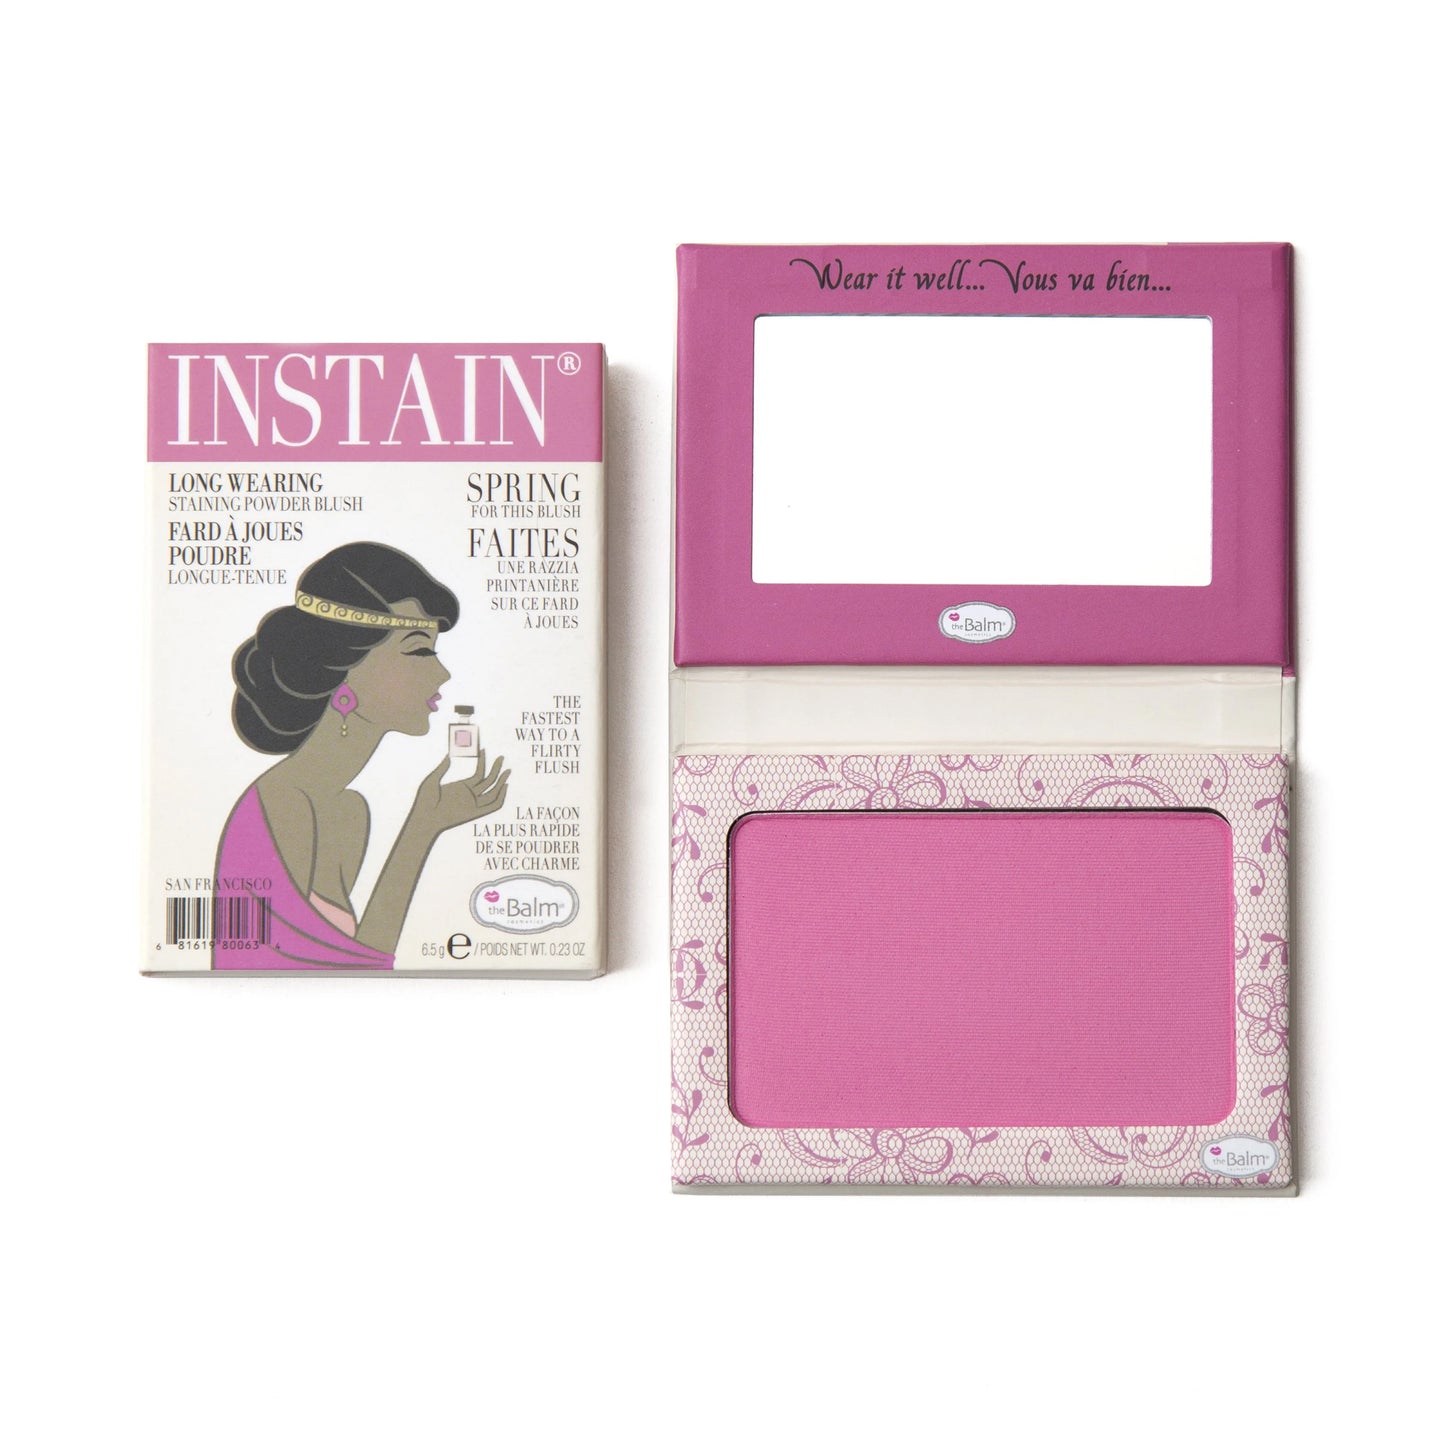 theBalm INSTAIN Long-Wearing Powder Staining Blush Lace